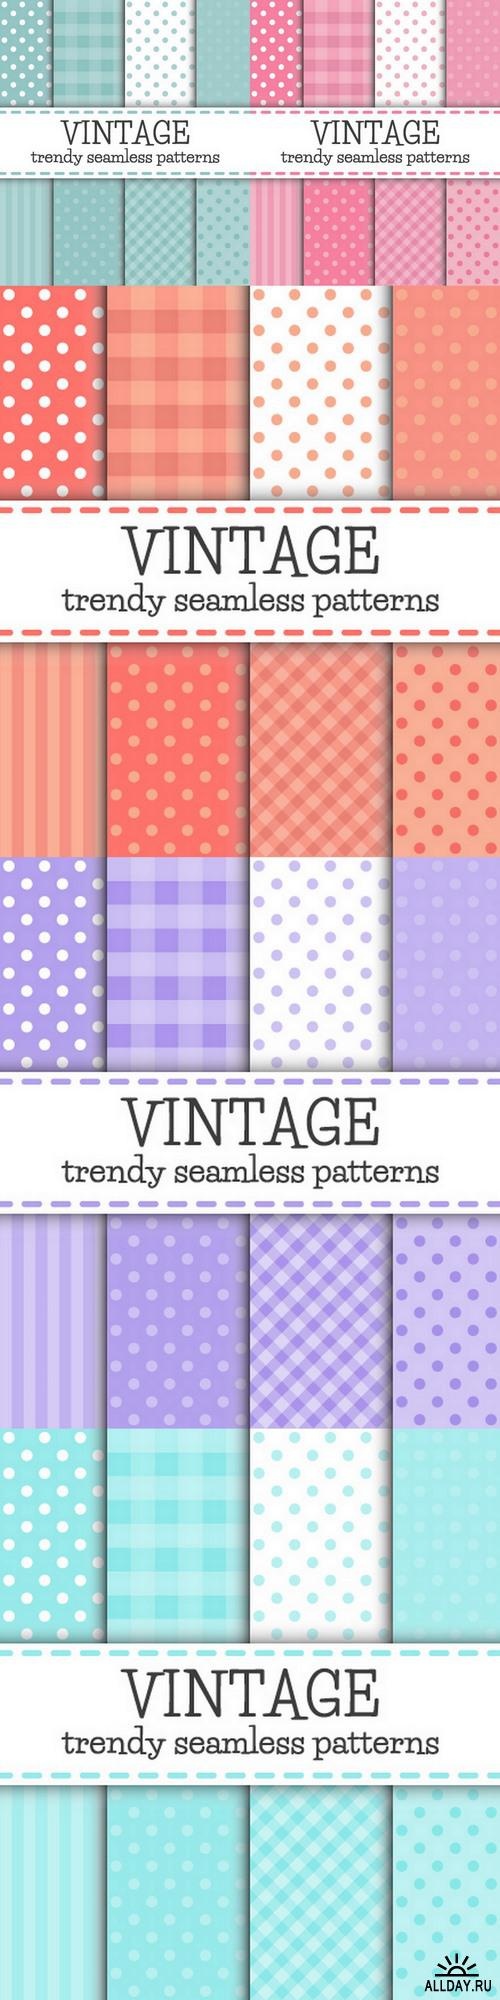 Set of Polka dot and Trendy patterns ((eps (6 files)